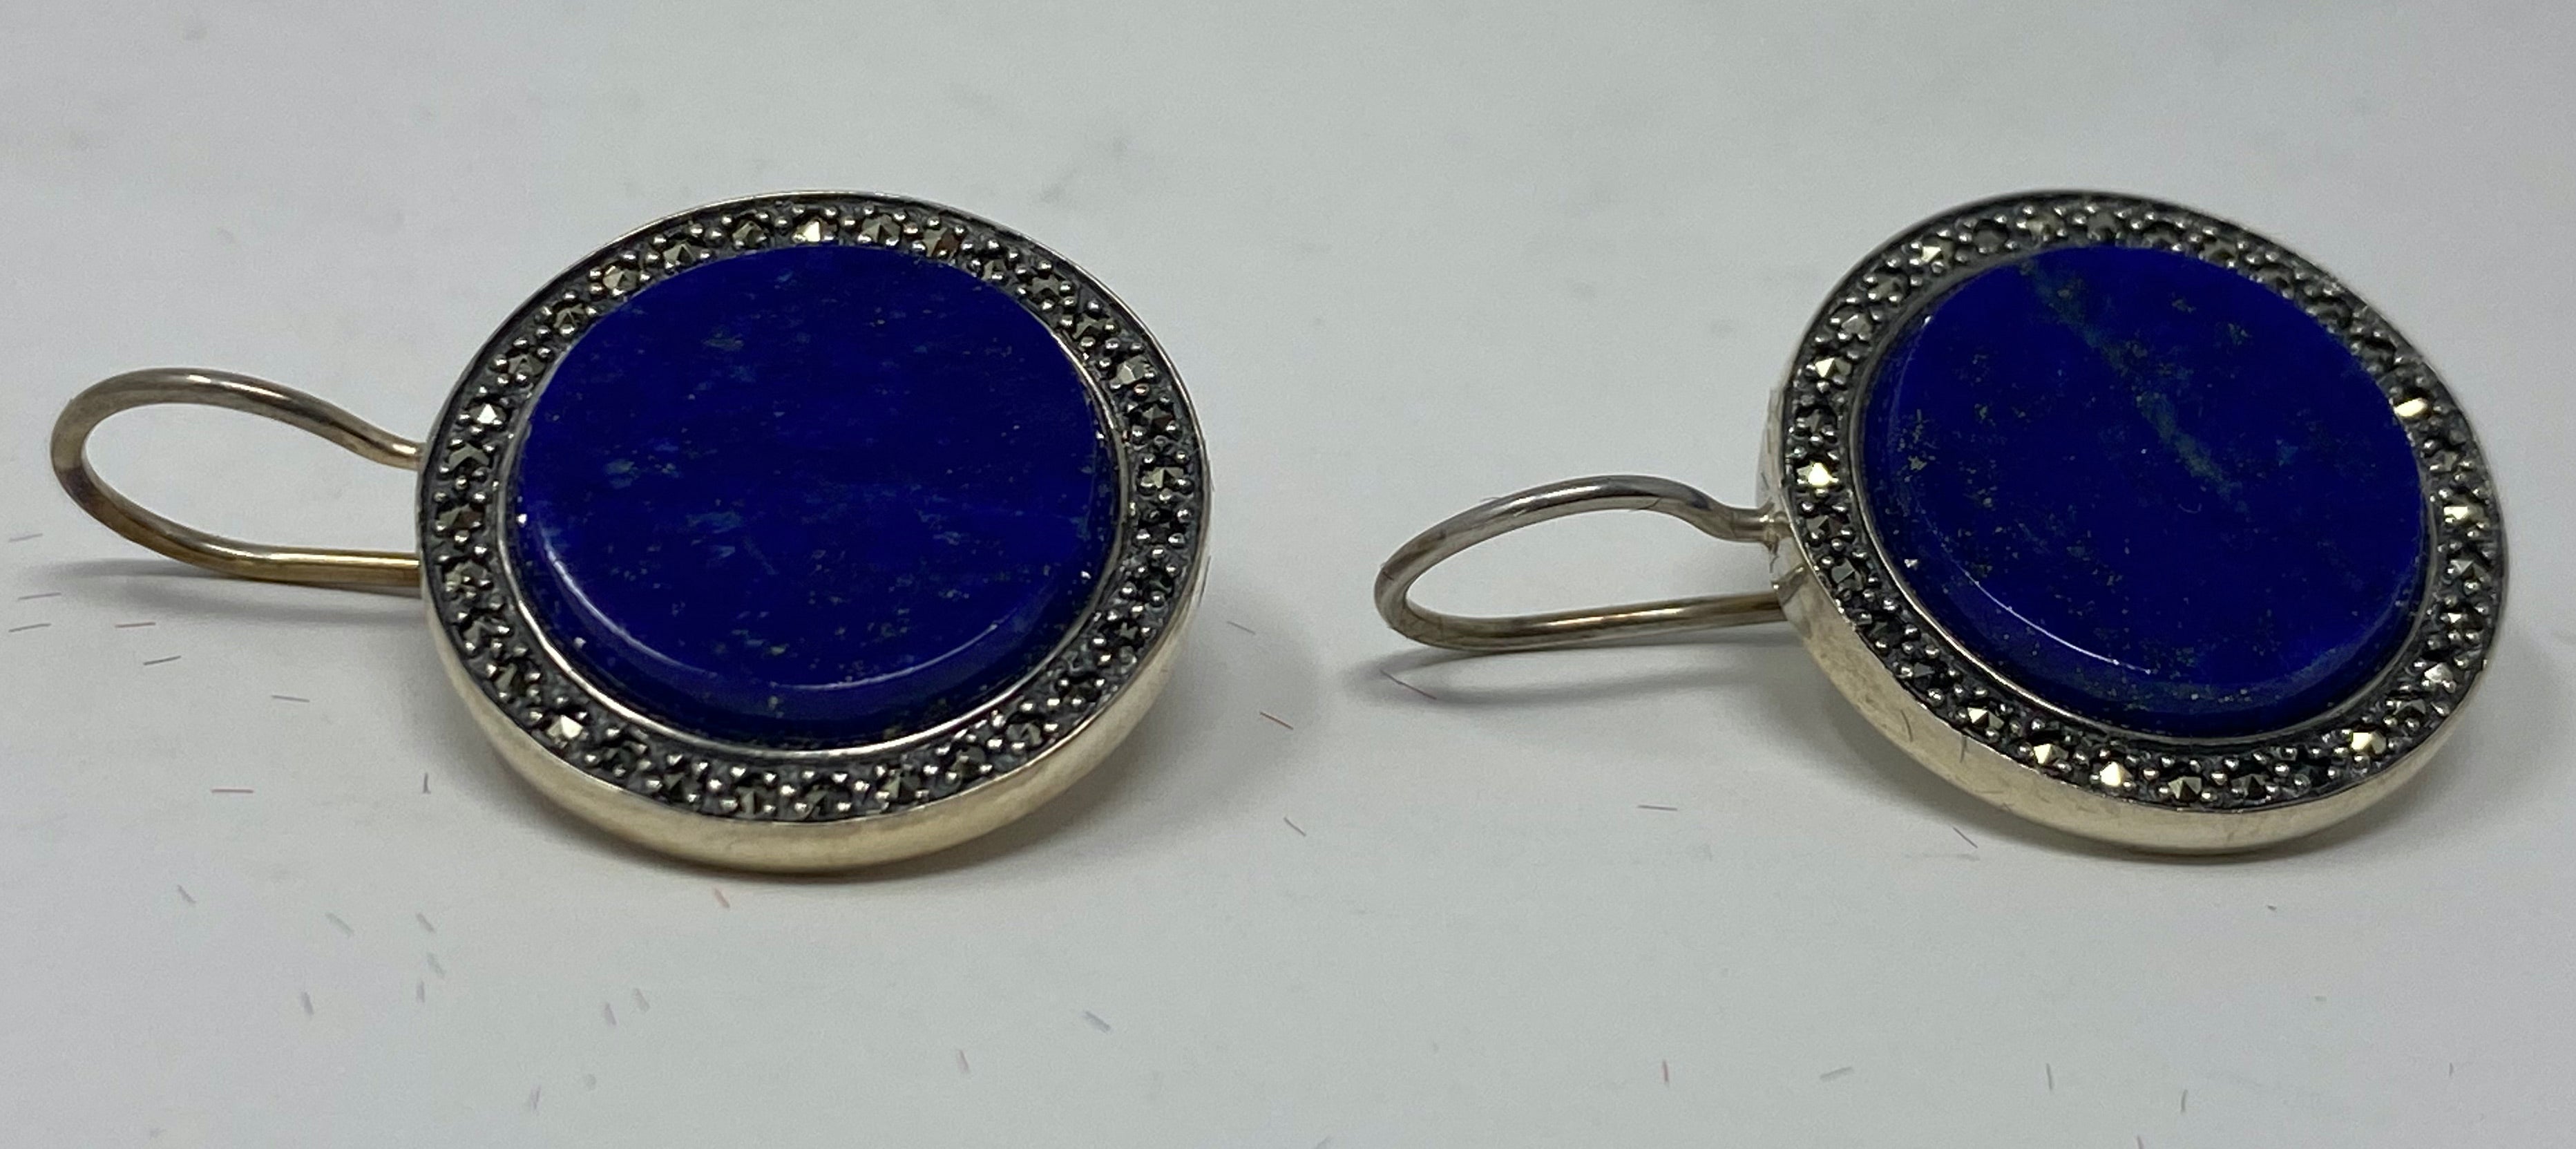 Silver, Lapis Lazuli and Marcasite Earrings